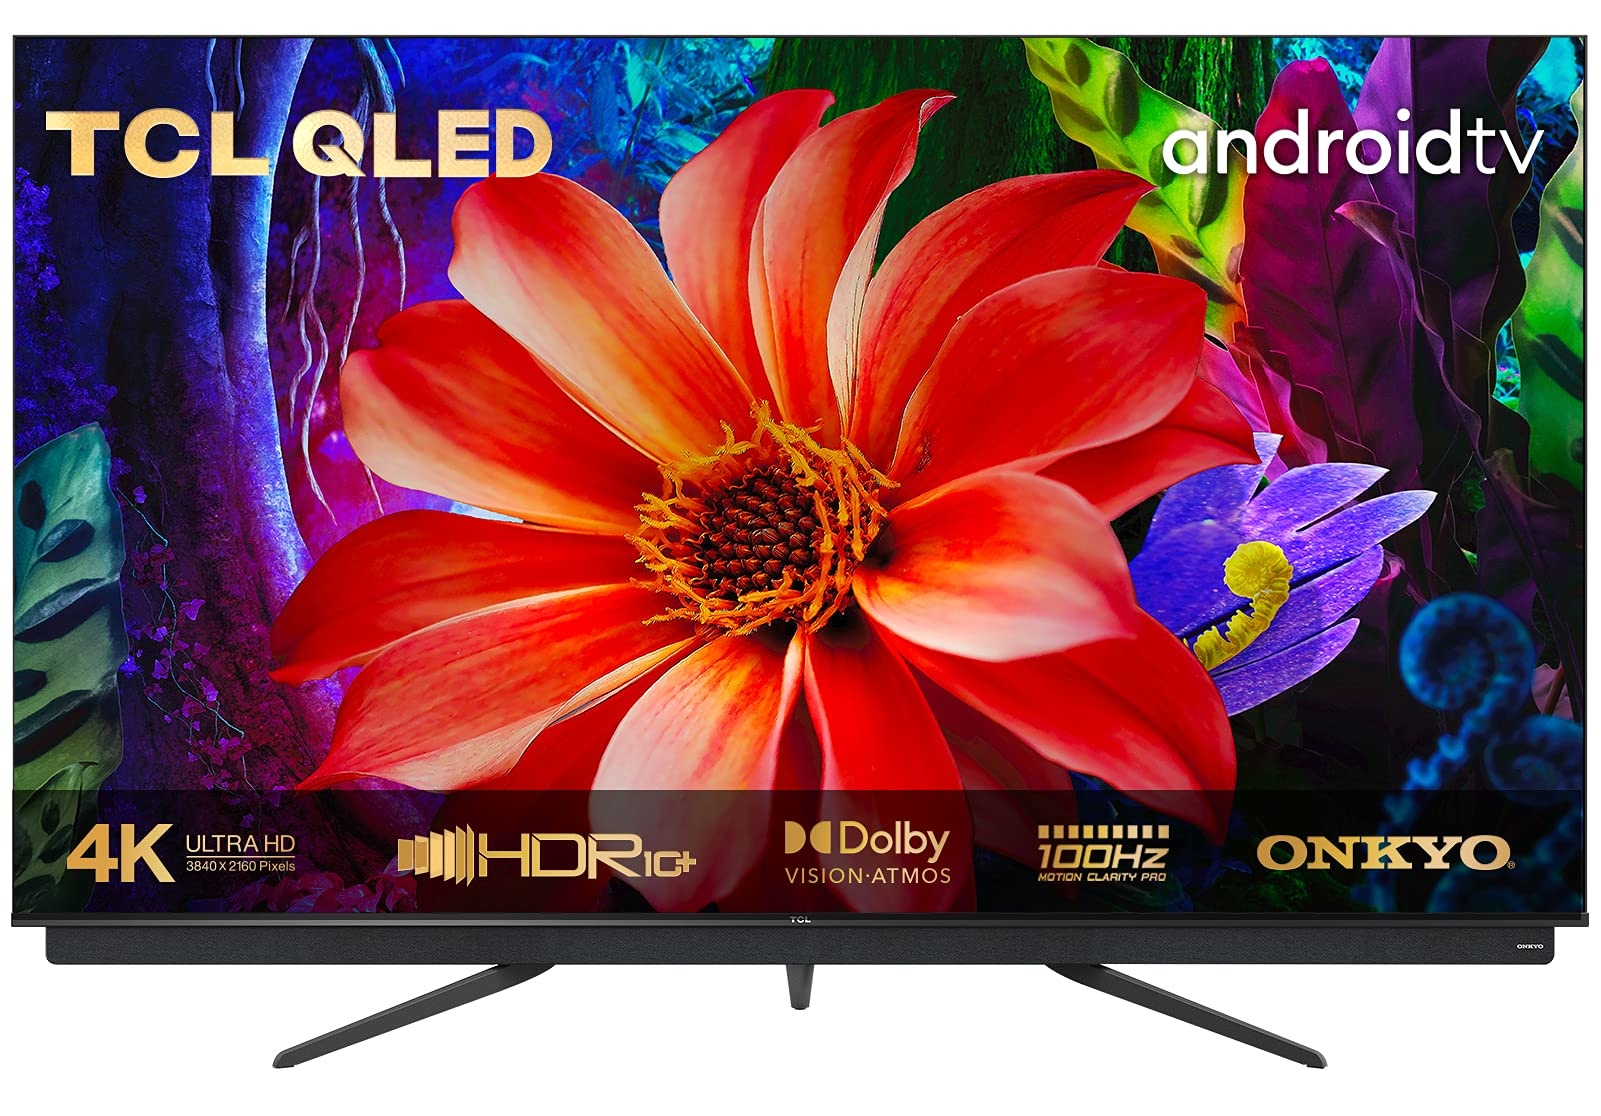 TCL 65C815 QLED Fernseher (65 Zoll) Smart TV (4K Ultra HD, HDR 10+, Triple Tuner, Android TV, Dolby Vision Atmos, integrierte ONKYO Soundbar, 120Hz Motion Clarity, Google-Assistent & Alexa)